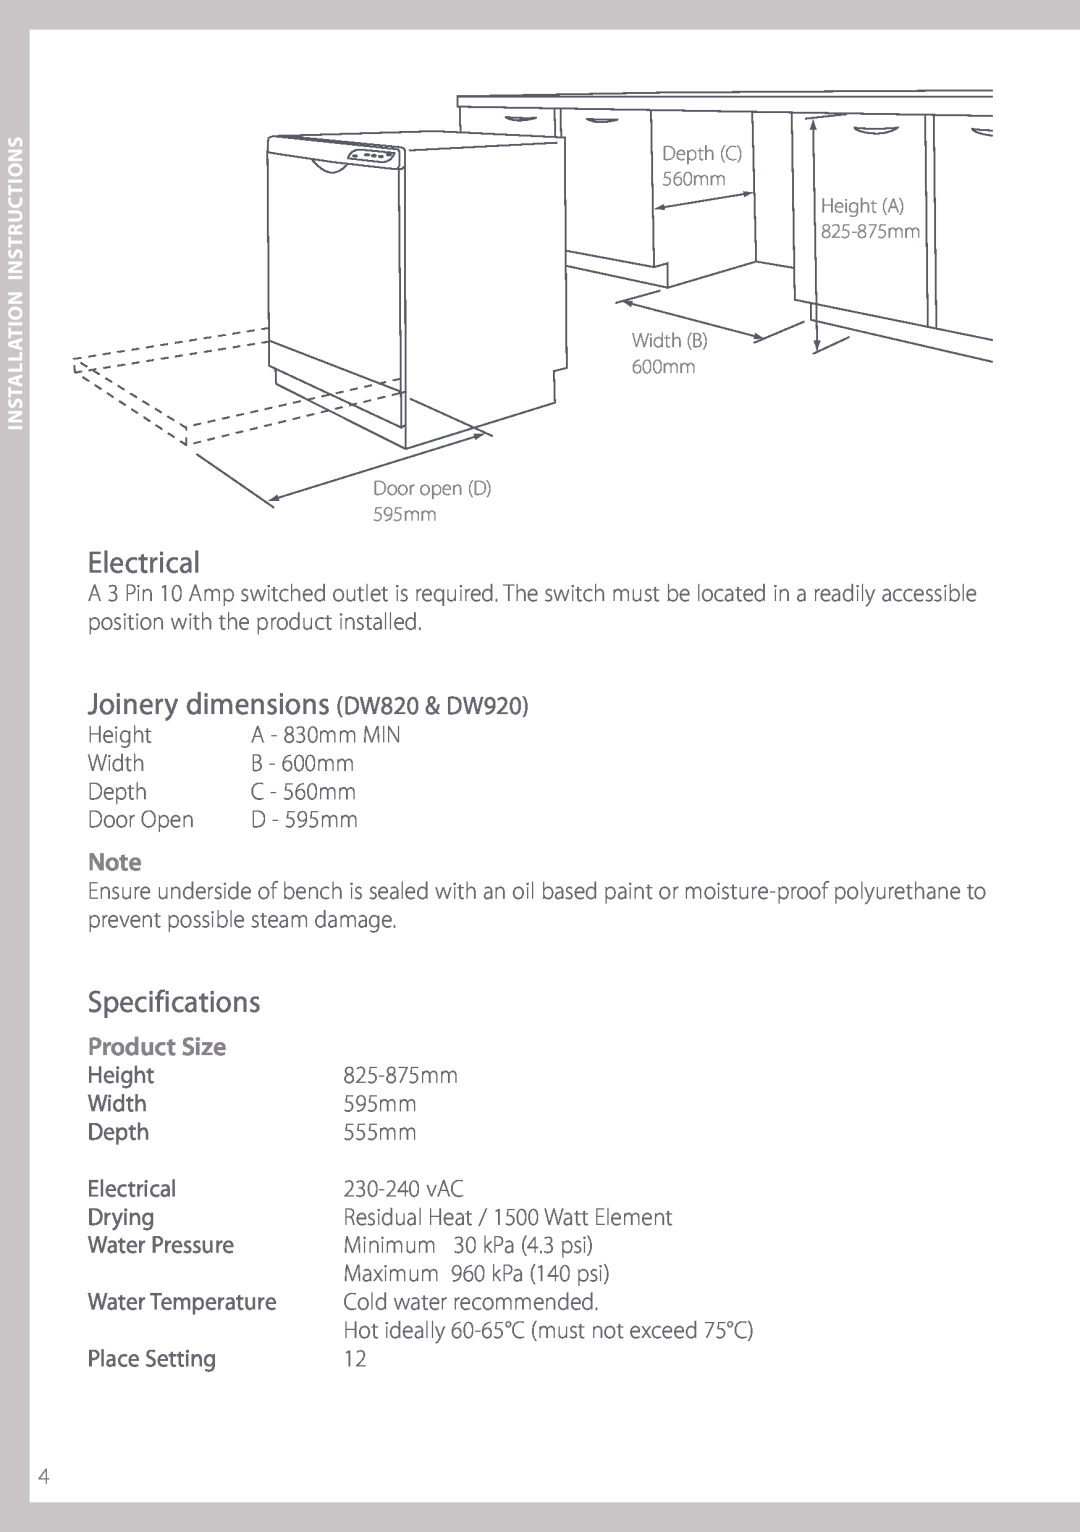 Fisher & Paykel installation instructions Electrical, Joinery dimensions DW820 & DW920, Specifications, Product Size 